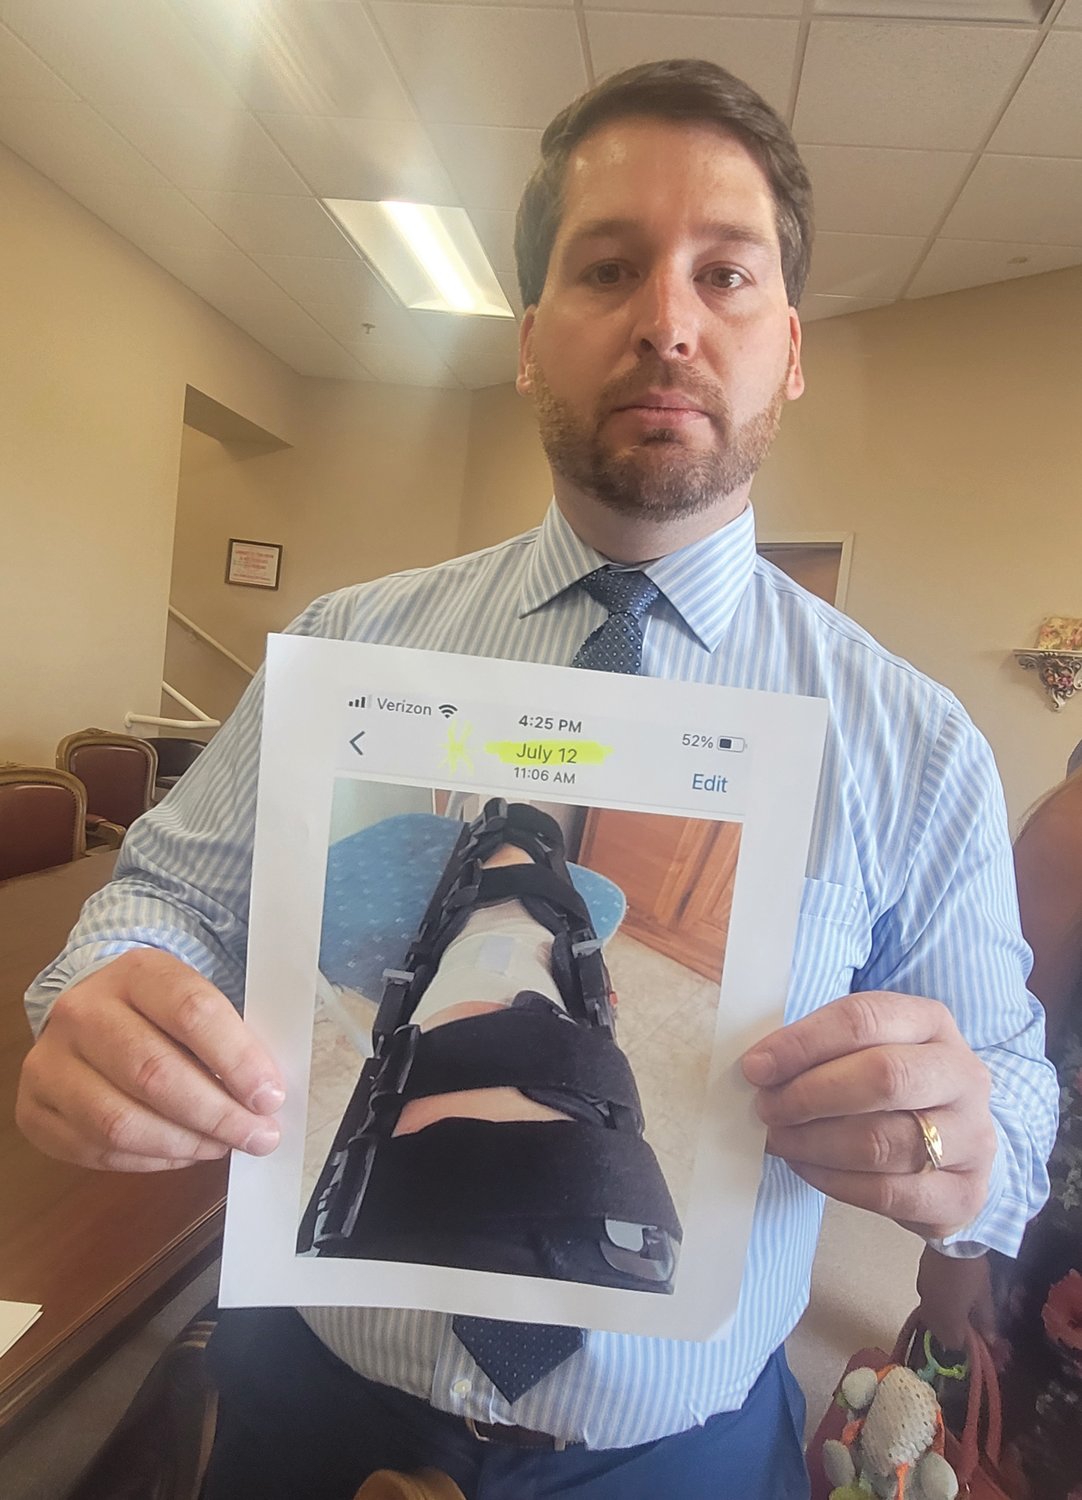 AILING MOM: Dennis Cardillo Jr. holds a photograph of what he says is his mother’s post-operative injury dated July 12. The candidate for state representative in District 42 has been accused of living outside the district. He insists he was merely taking care of his mother in Cranston while she recuperated.